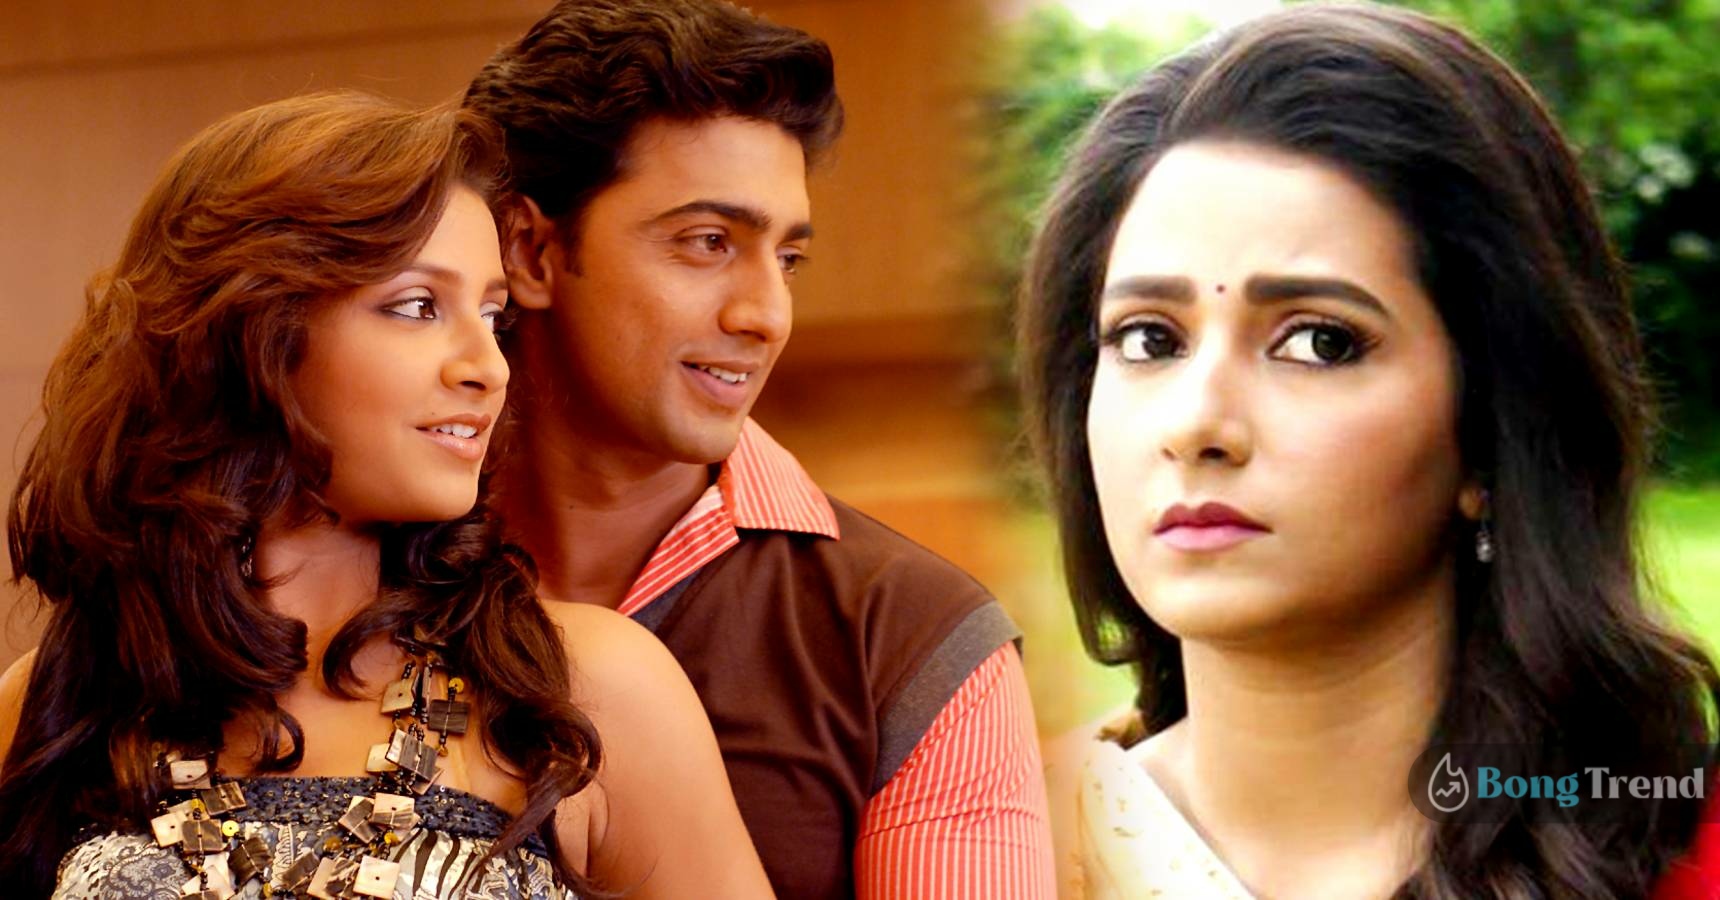 When Subhashree Ganguly indirectly talked about her breakup with Dev